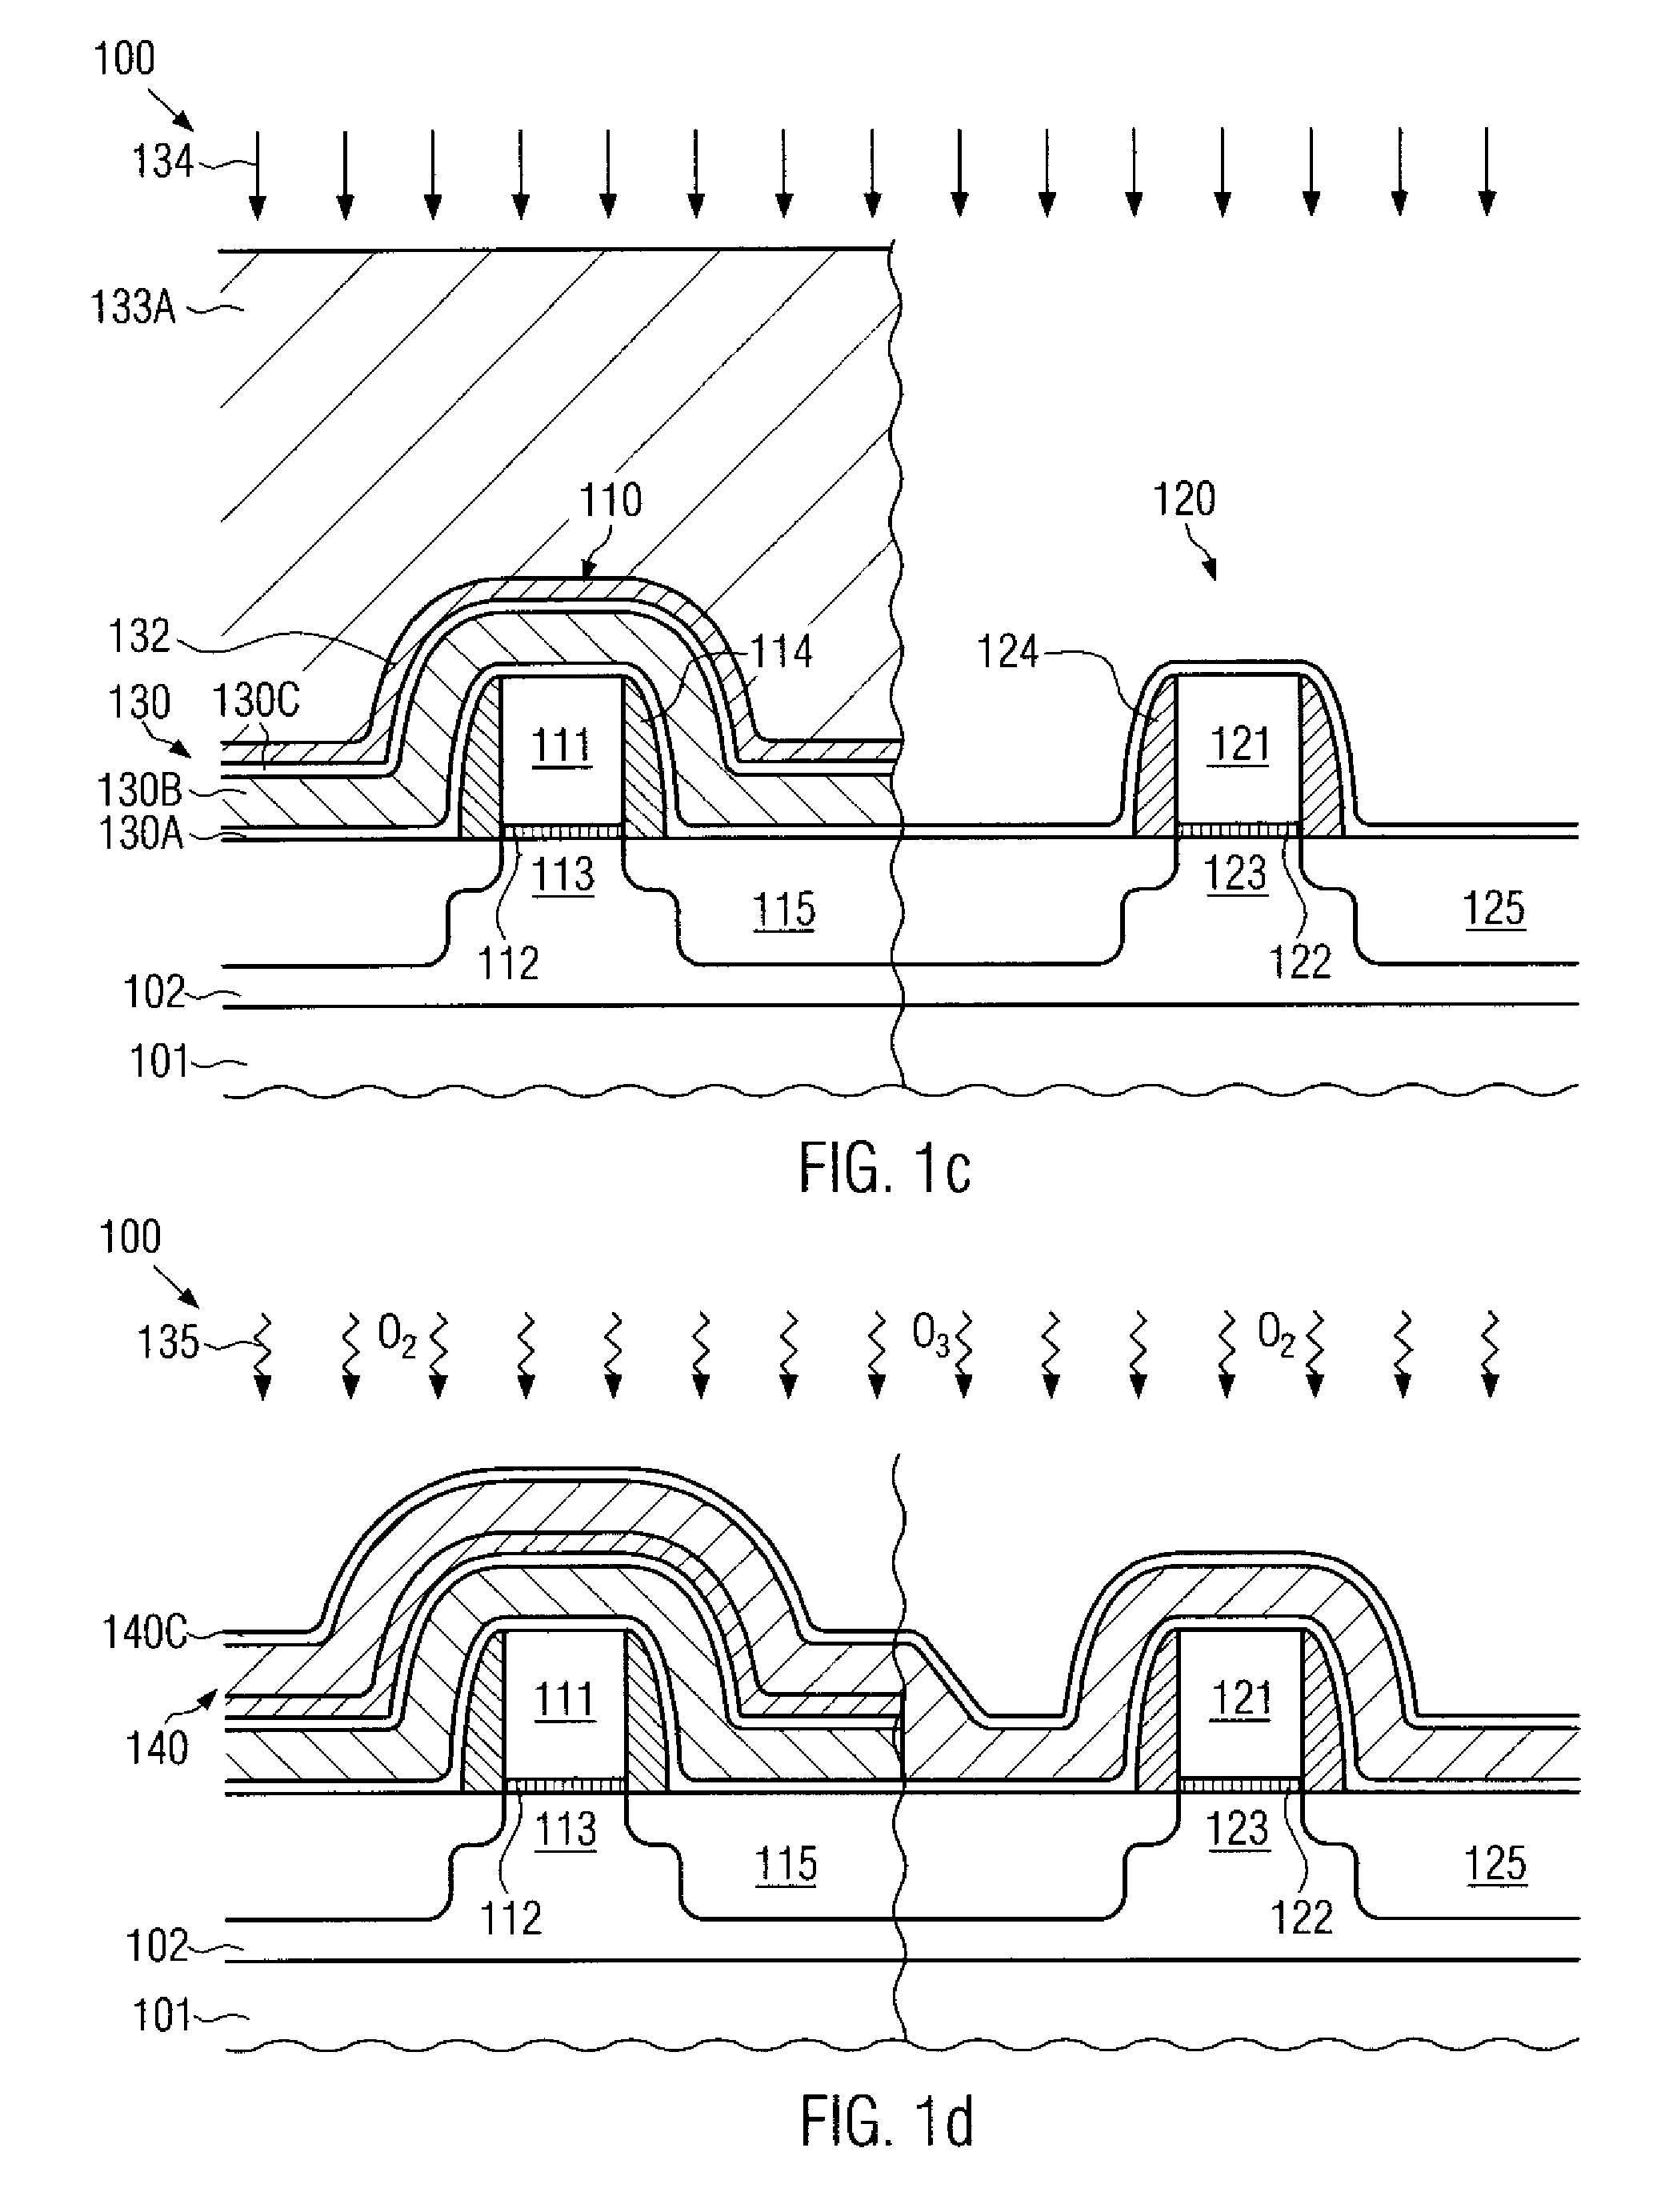 Method for reducing resist poisoning during patterning of silicon nitride layers in a semiconductor device